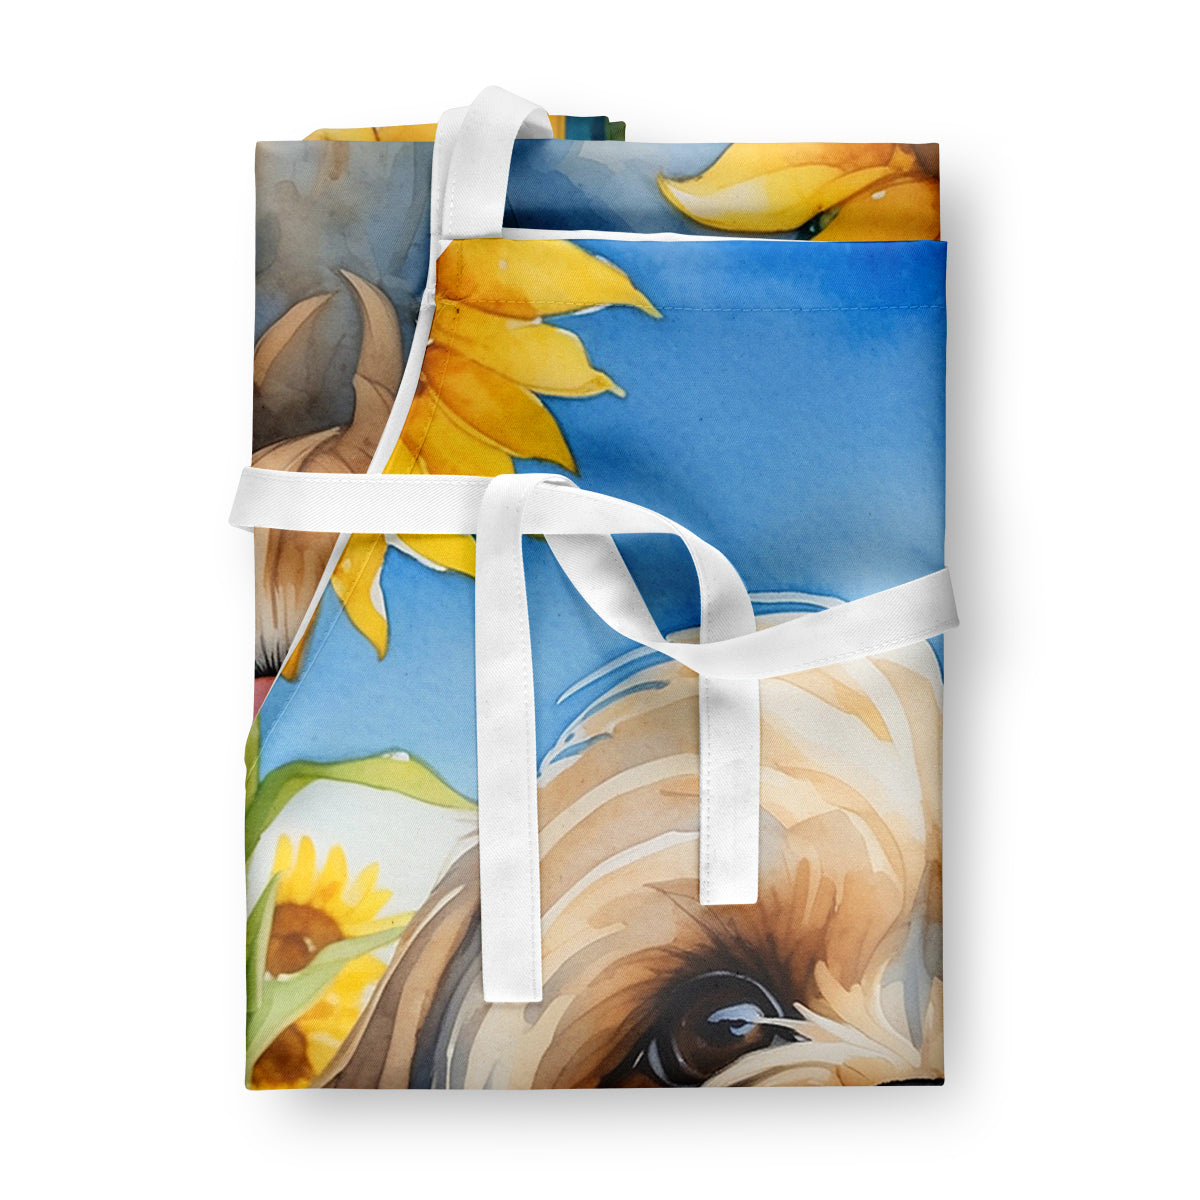 Lhasa Apso in Sunflowers Apron